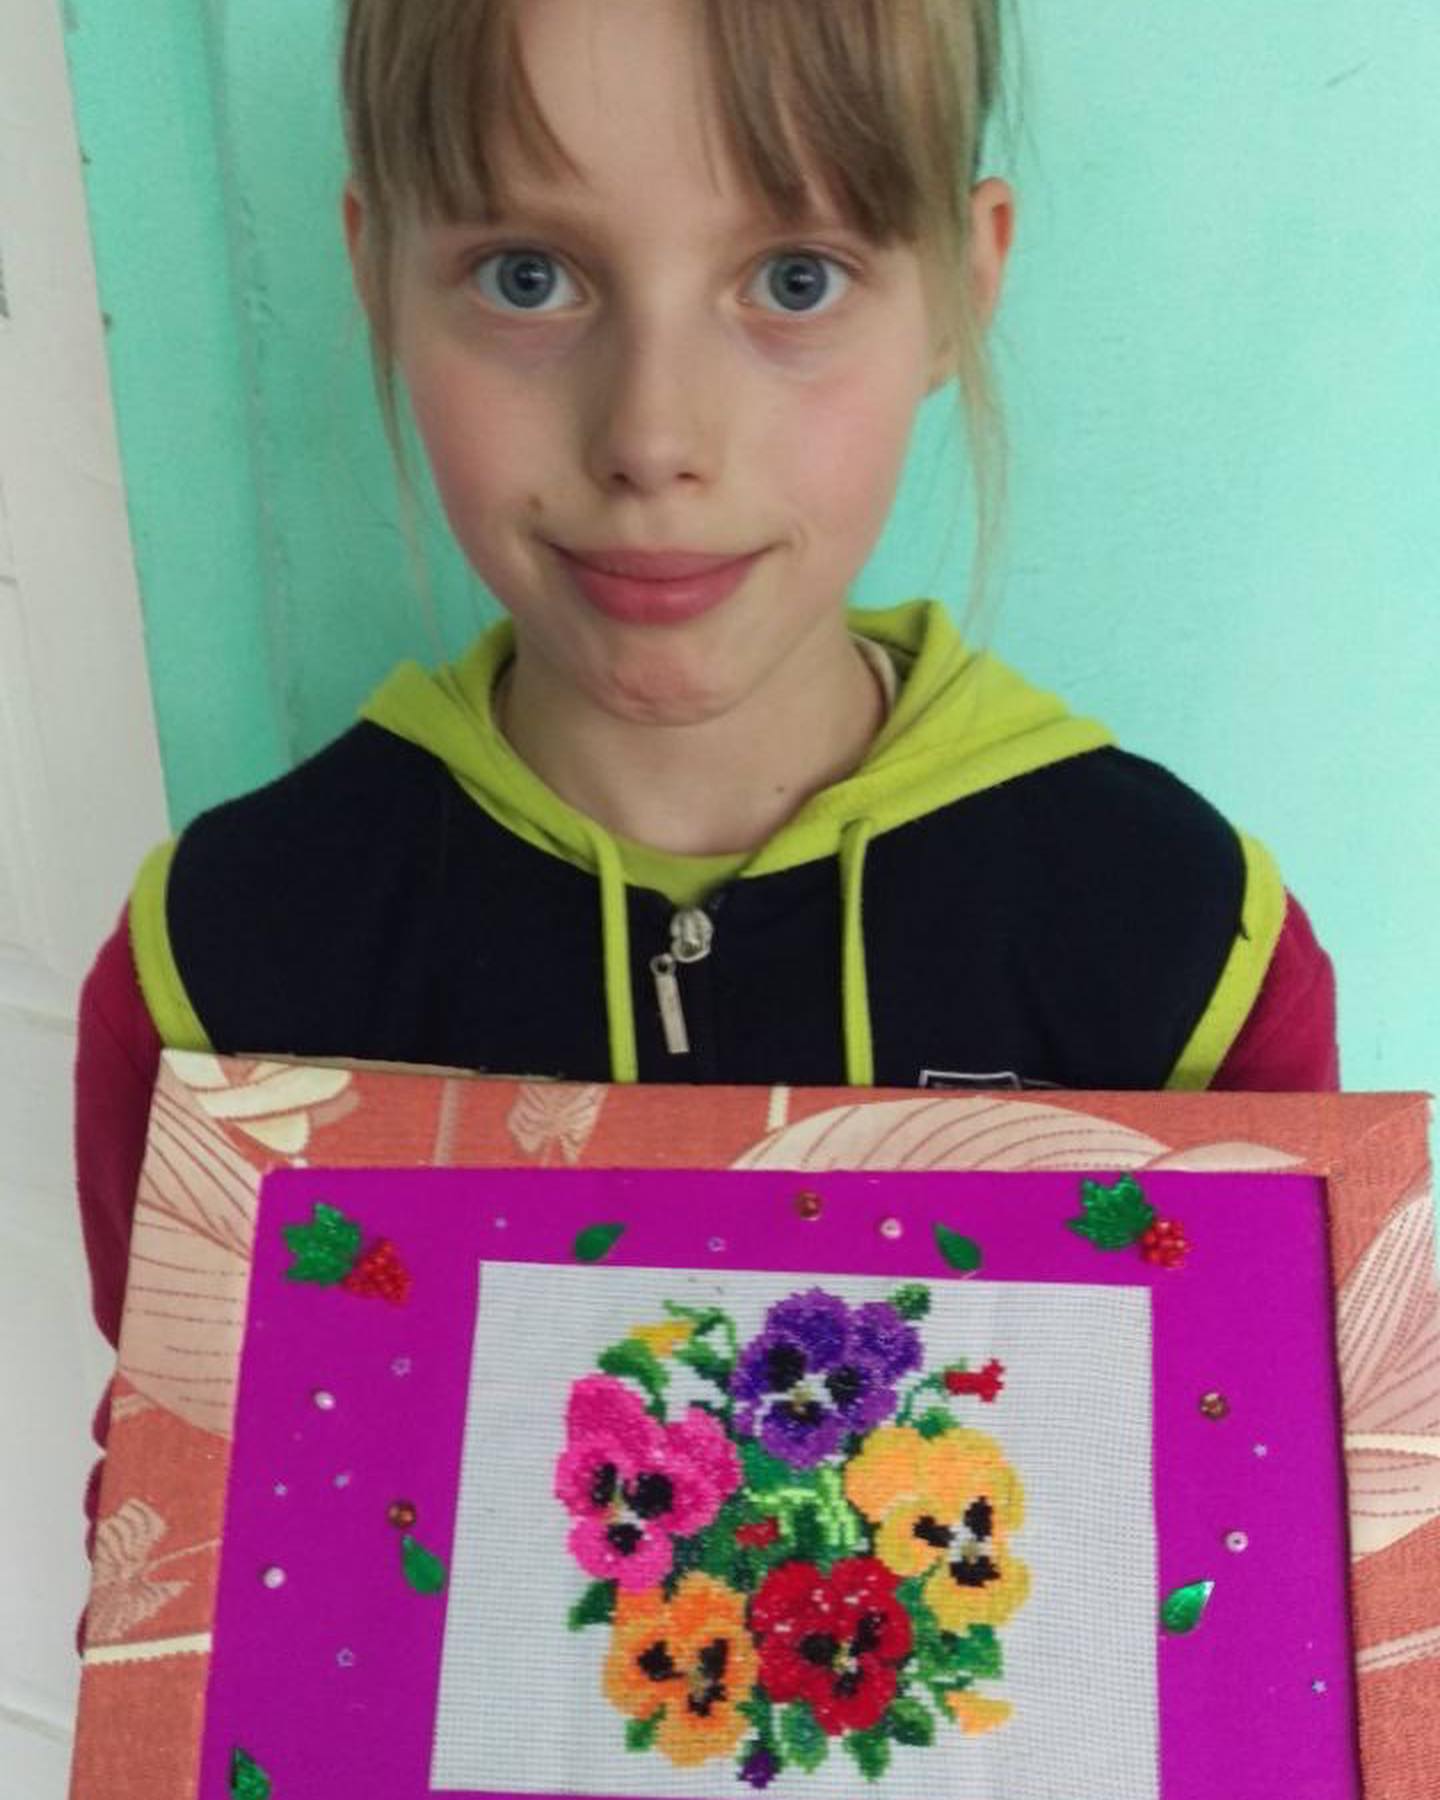 A girl holding up a picture of pansies.